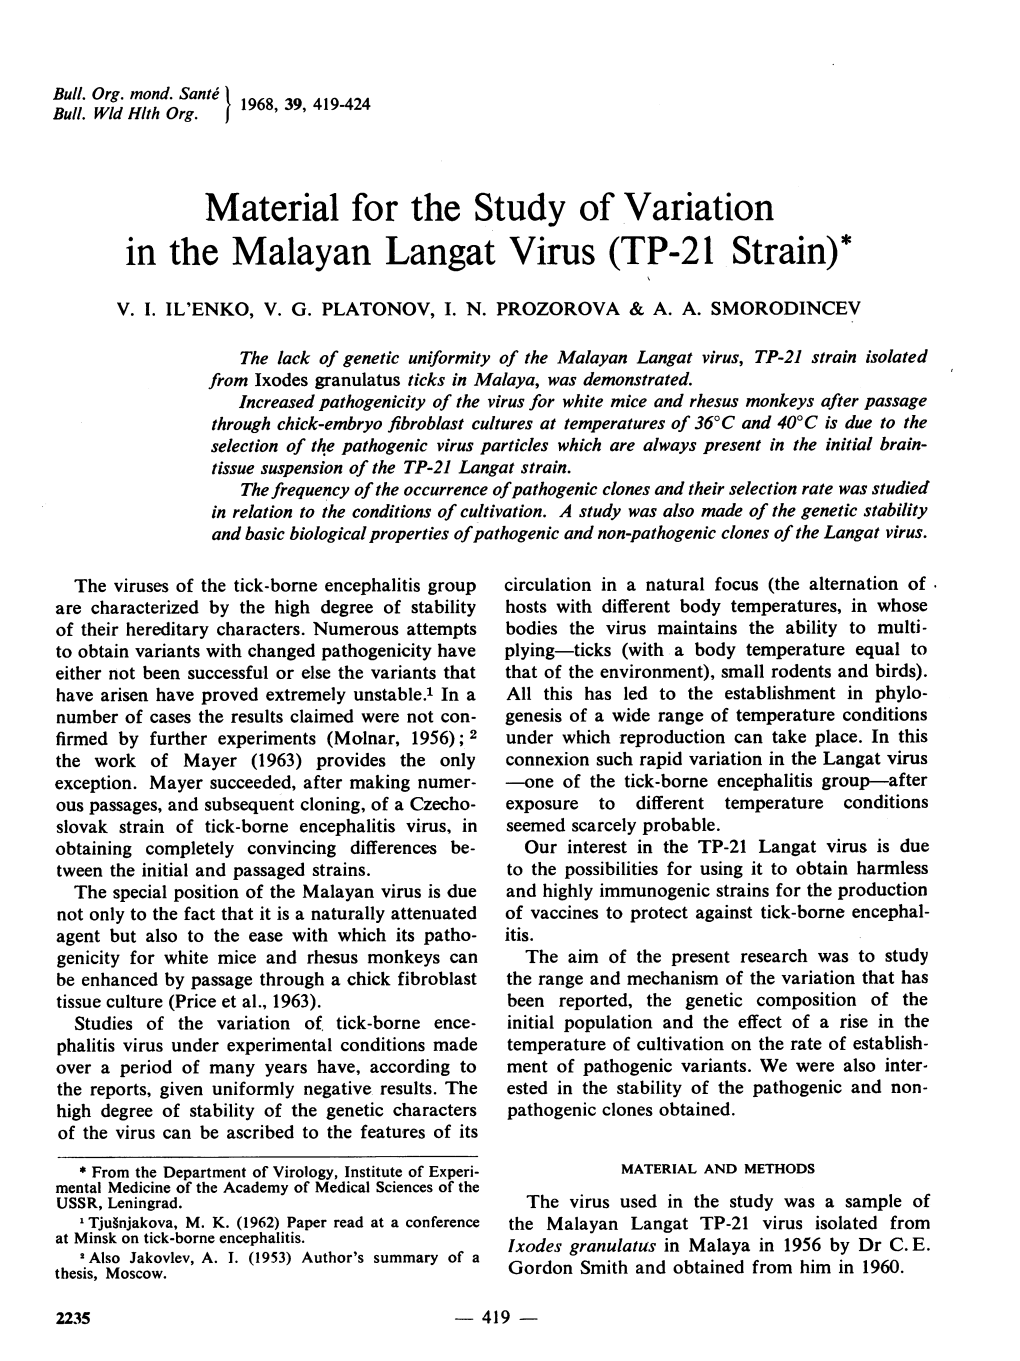 Material for the Study of Variation in the Malayan Langat Virus (TP-21 Strain)*